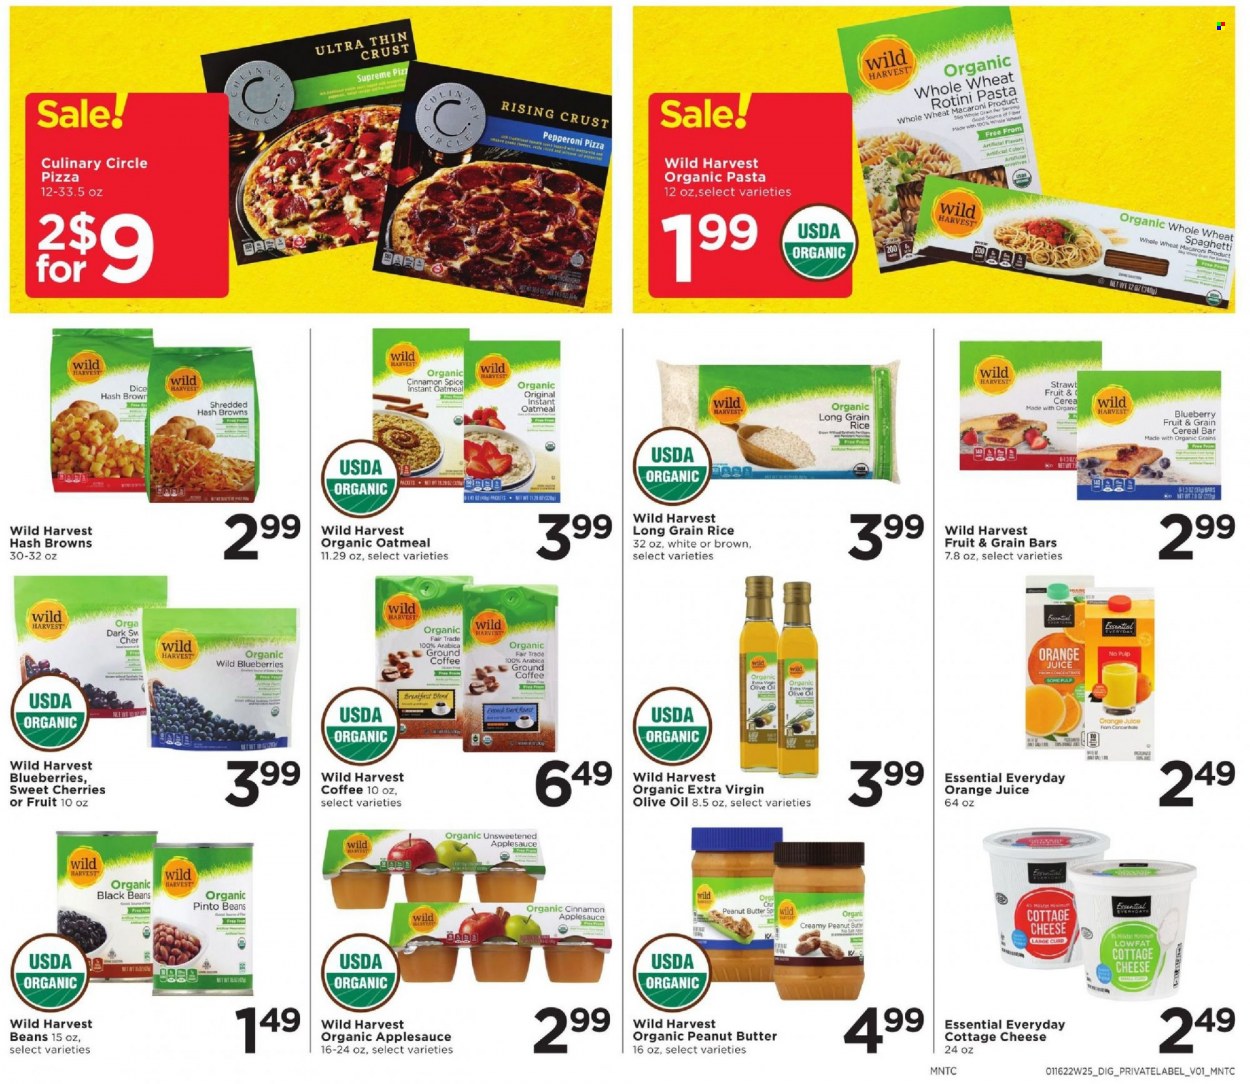 thumbnail - Cub Foods Flyer - 01/16/2022 - 01/22/2022 - Sales products - Wild Harvest, blueberries, cherries, spaghetti, pizza, macaroni, pasta, pepperoni, cottage cheese, curd, hash browns, cereal bar, oatmeal, black beans, pinto beans, cereals, rice, long grain rice, spice, cinnamon, extra virgin olive oil, olive oil, oil, apple sauce, peanut butter, orange juice, juice, coffee, ground coffee. Page 9.